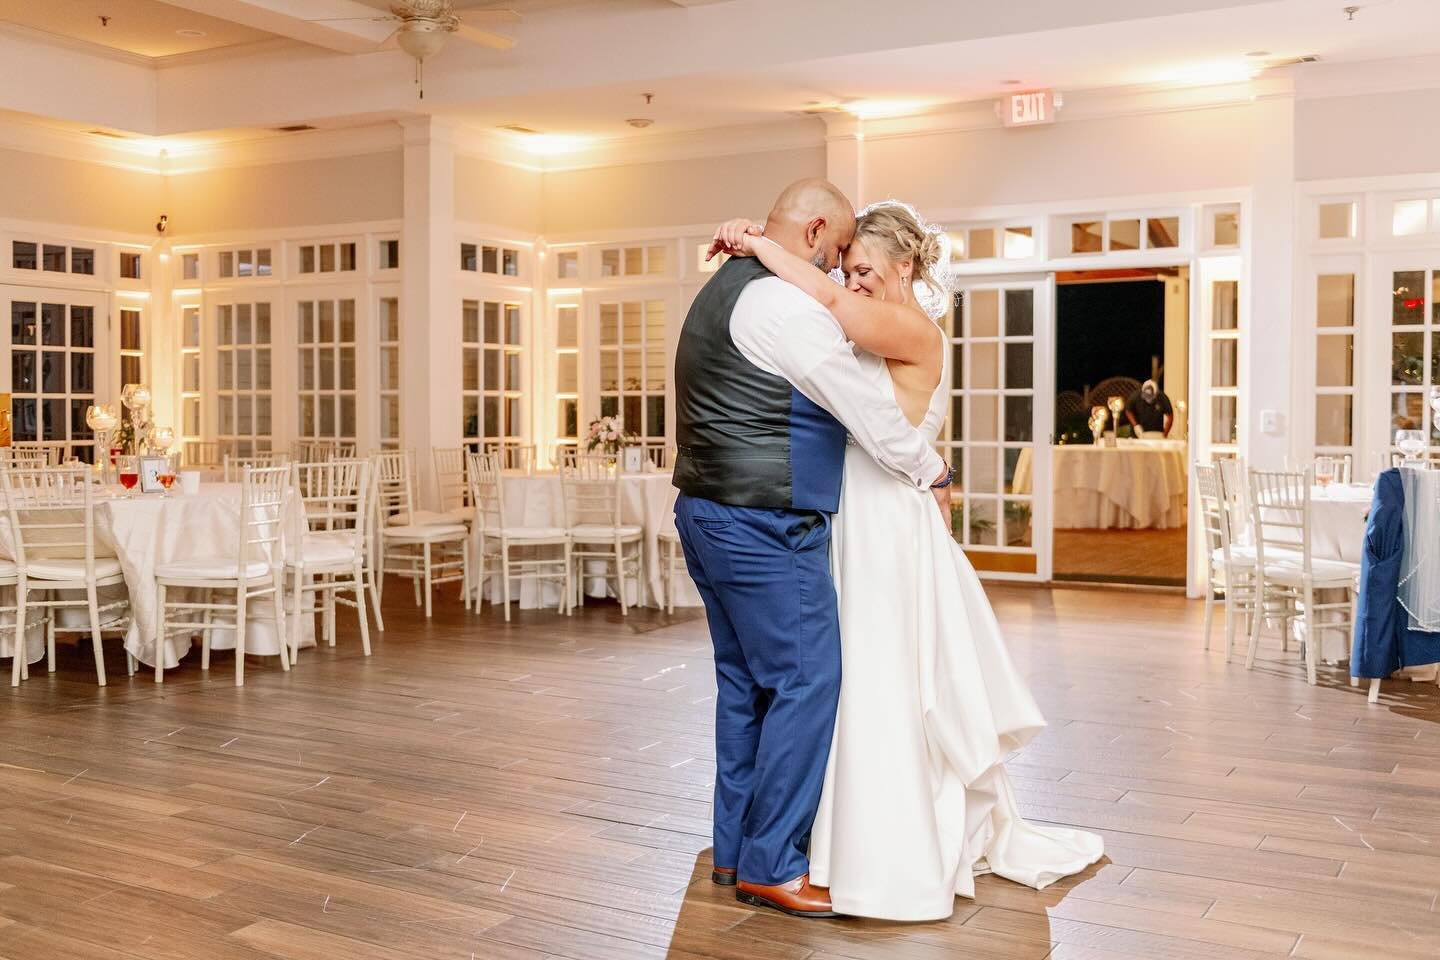 Private last dances: yay or nay? 🌟 We love this intimate moment captured at Flint Hill, where the newlyweds share a final dance before their departure. What do you think of this wedding trend? Let us know in the comments! 💕 #FlintHillWeddings #Priv